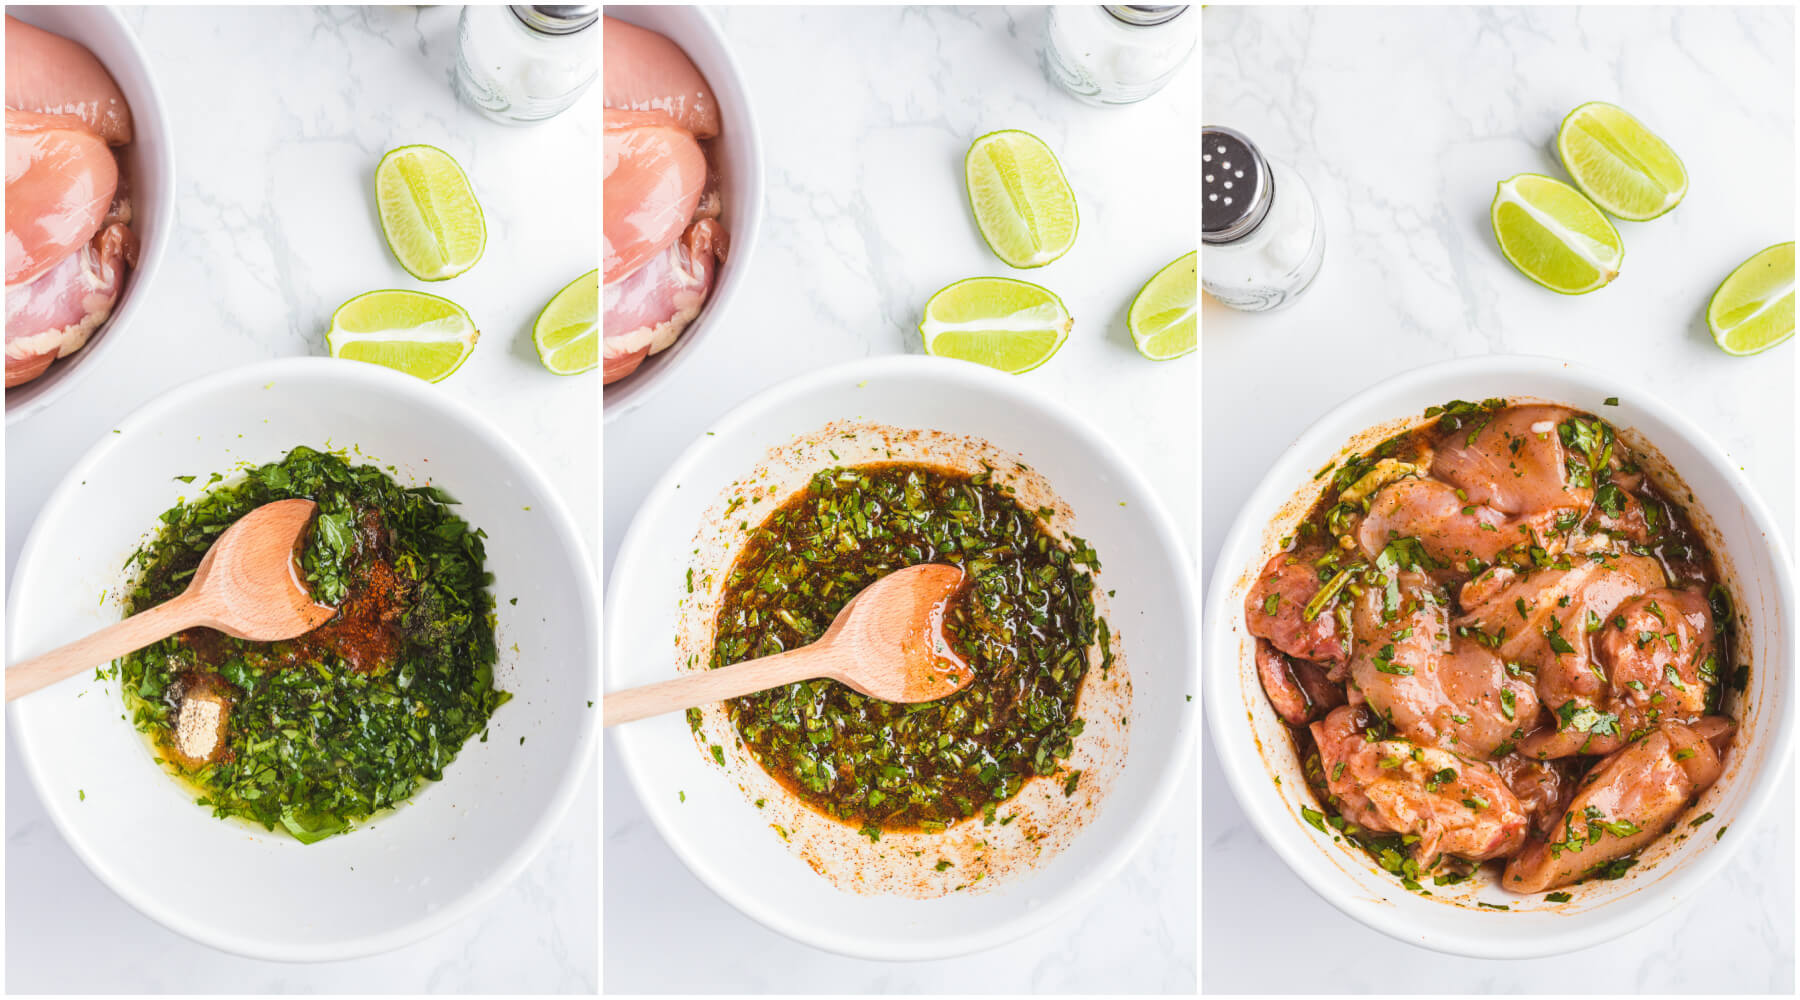 A series of process photos showing how to make a lime and cilantro marinade for chicken.